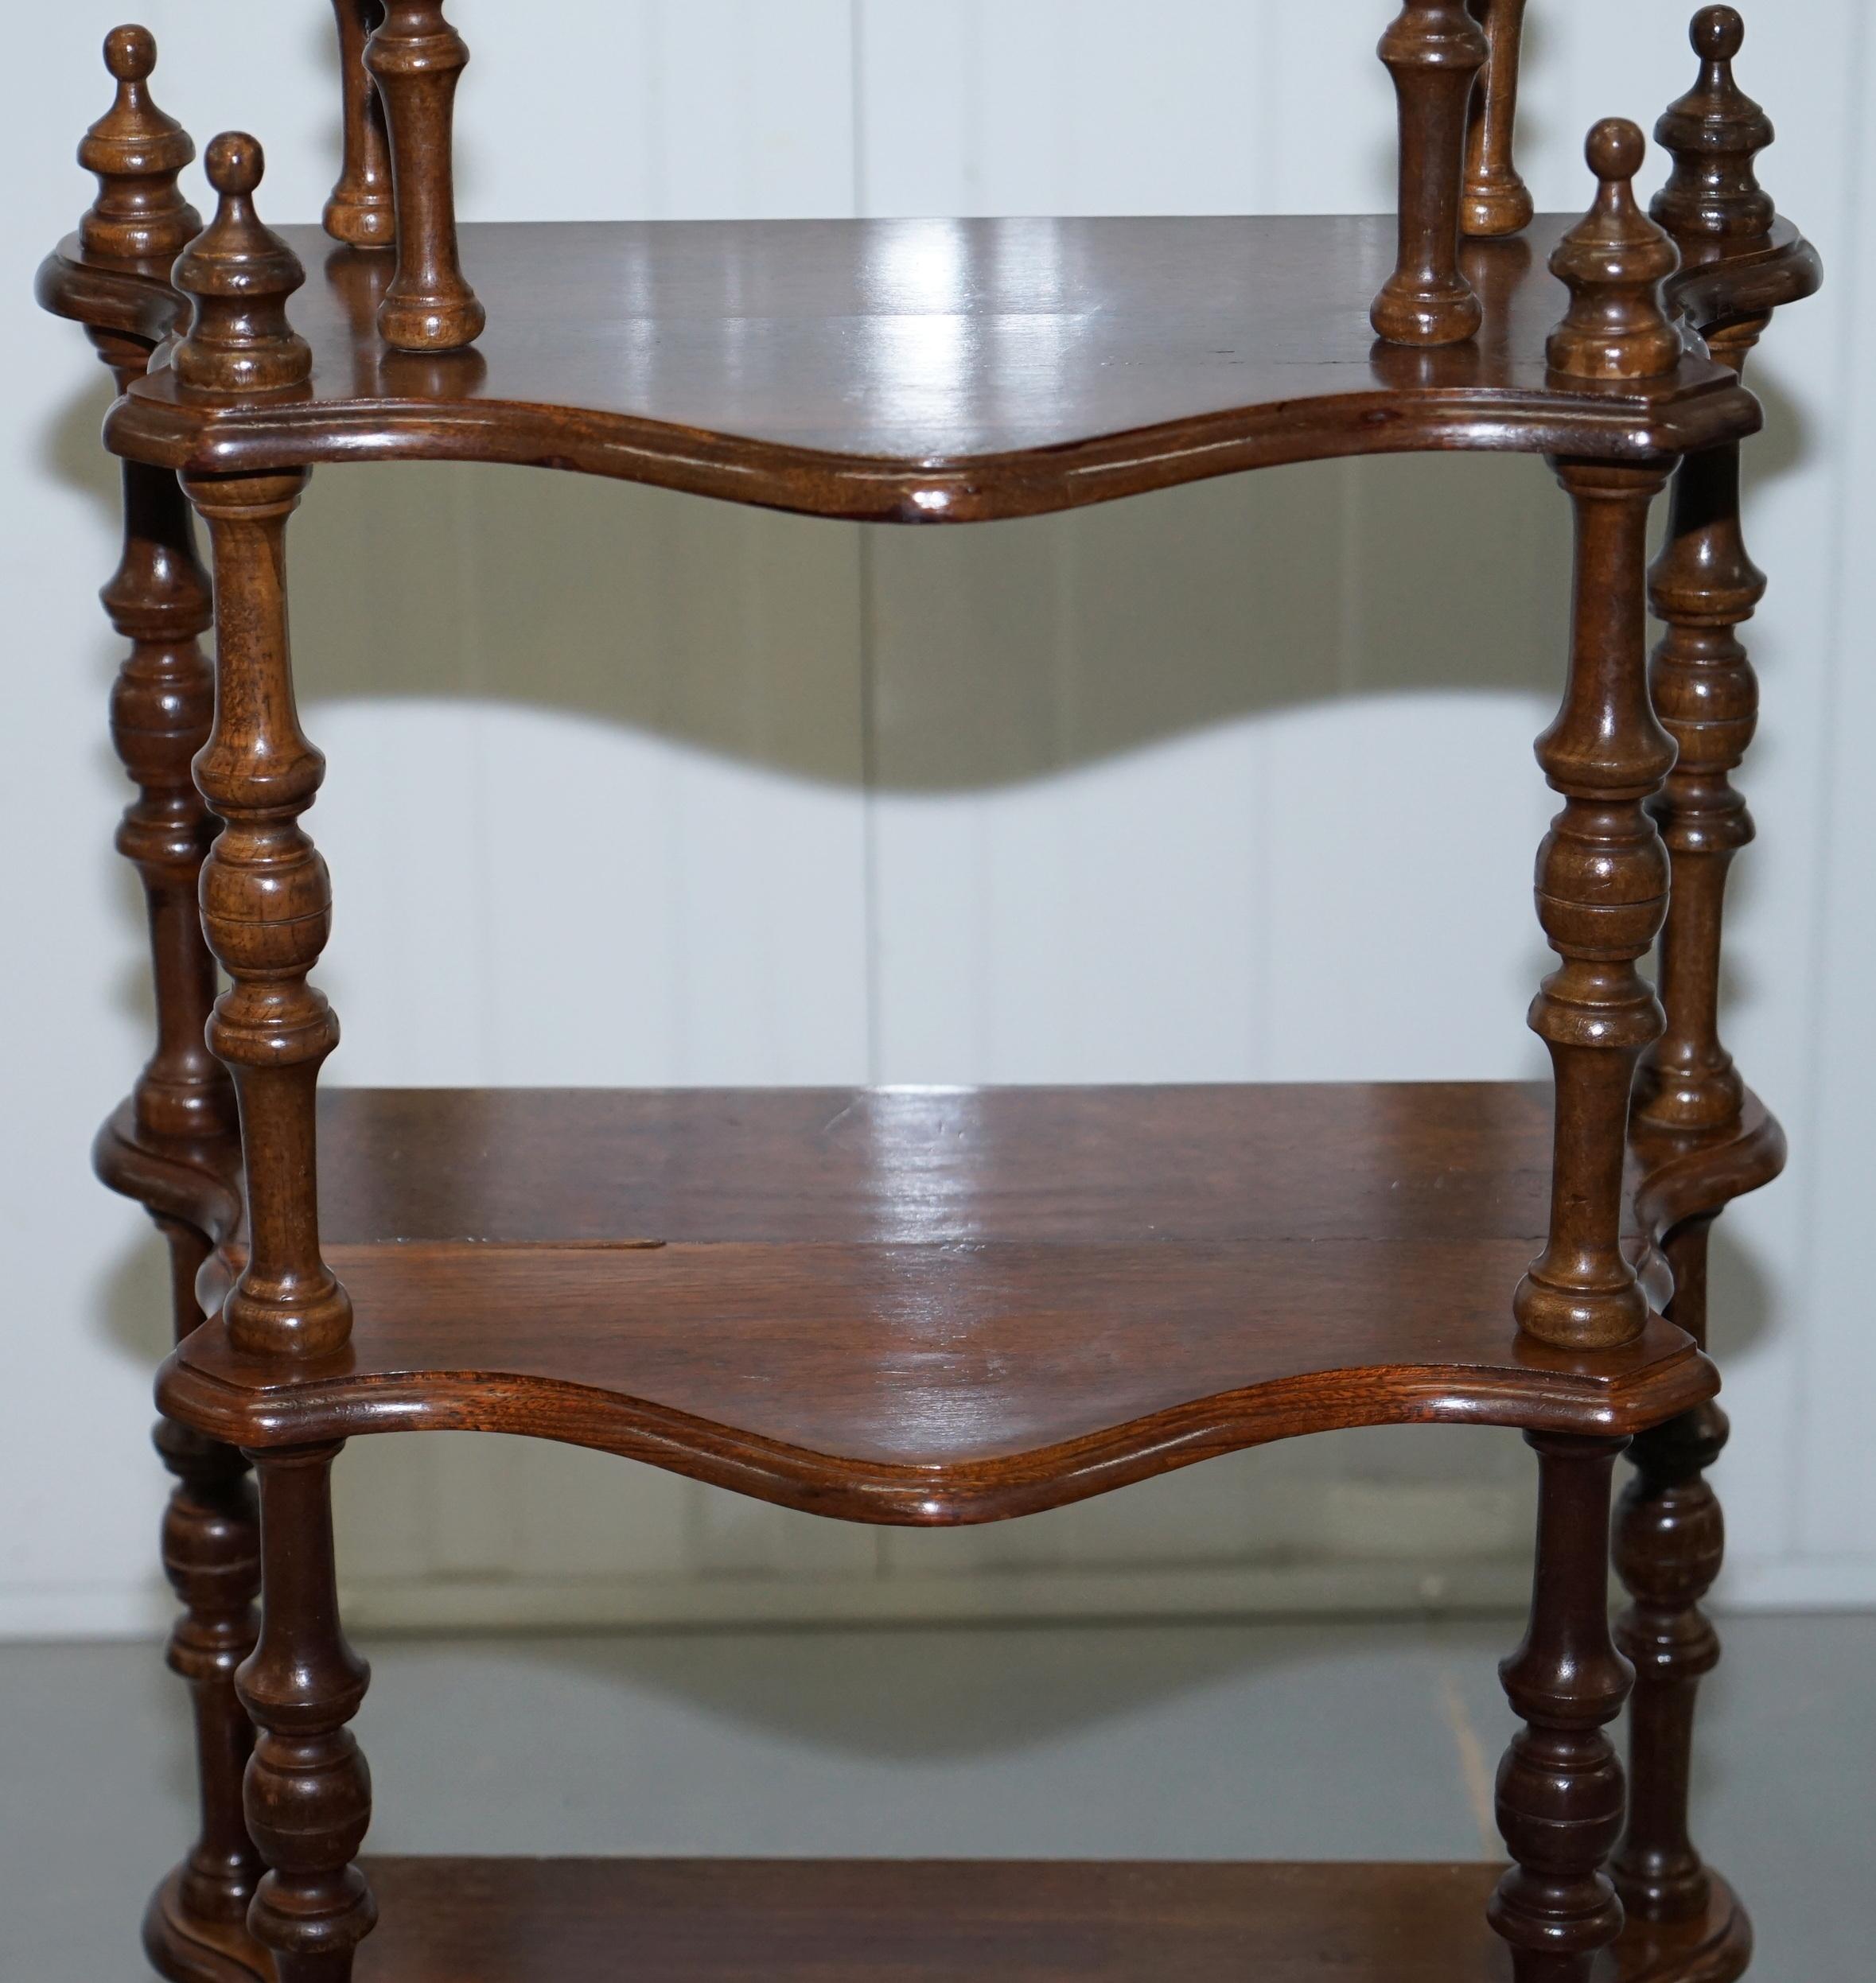 Lovely Small Mahogany Whatnot Bookcase Nicely Turned Pillars Functional Piece 1